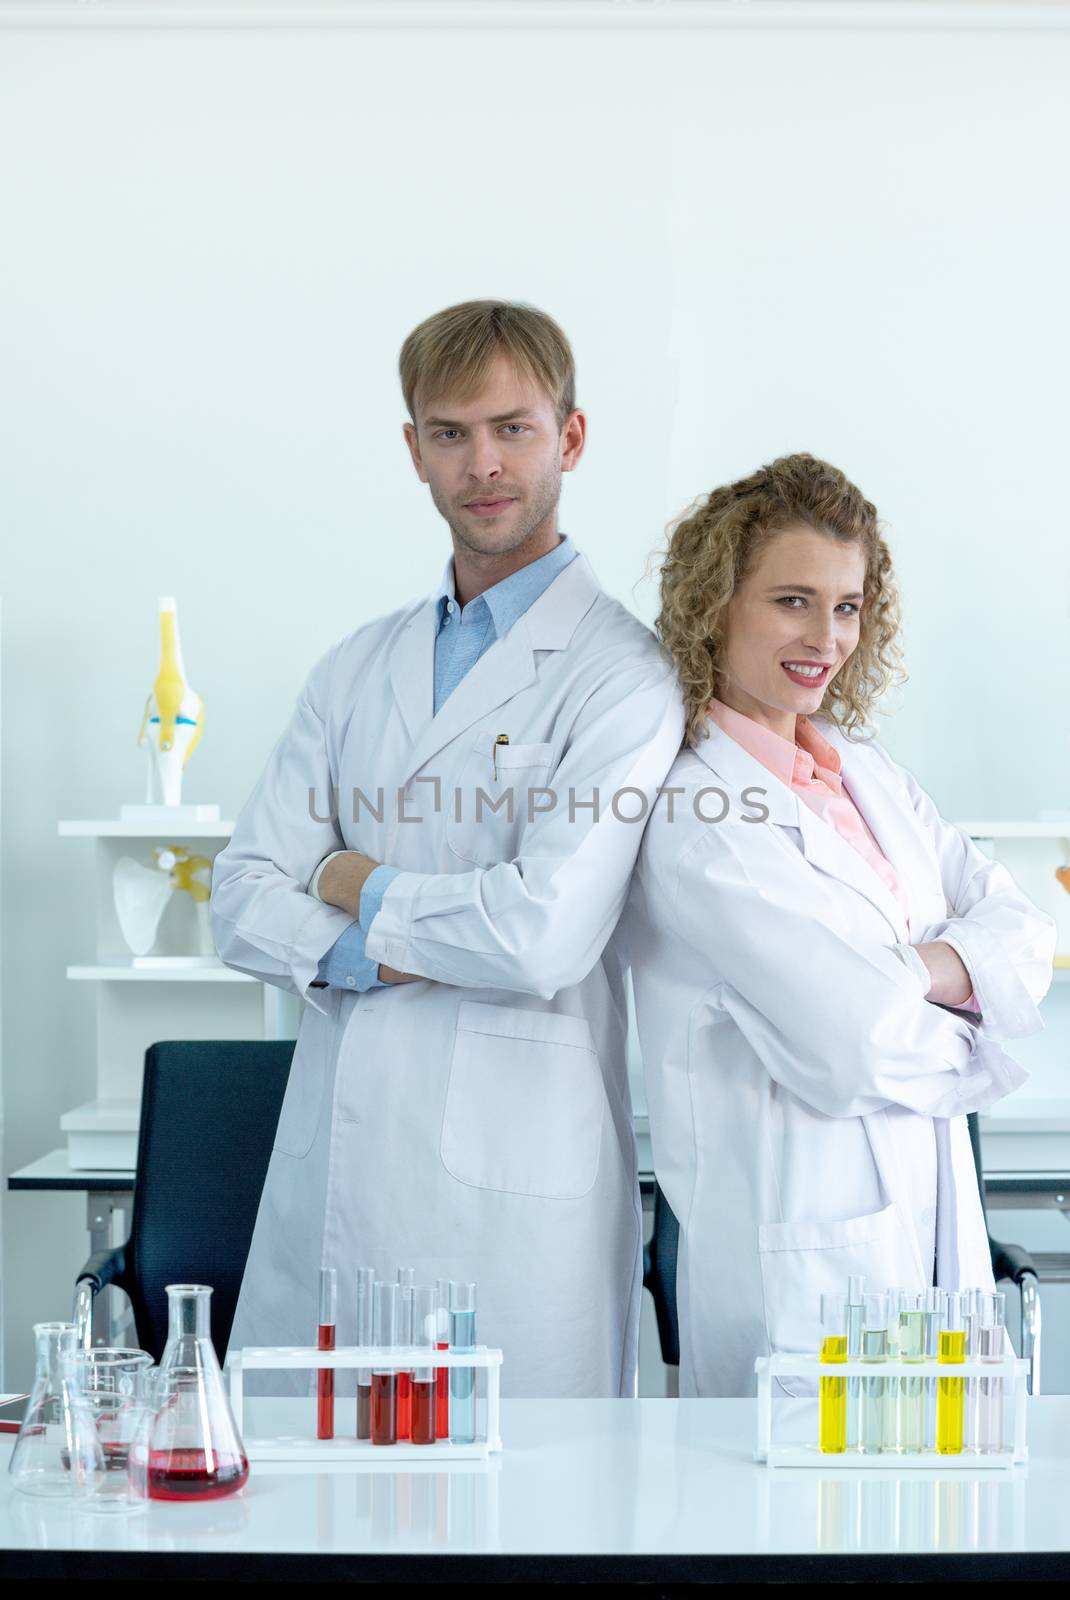 Two scientists stood confidently with folded arms before the experiment began. Working atmosphere in a scientific laboratory.